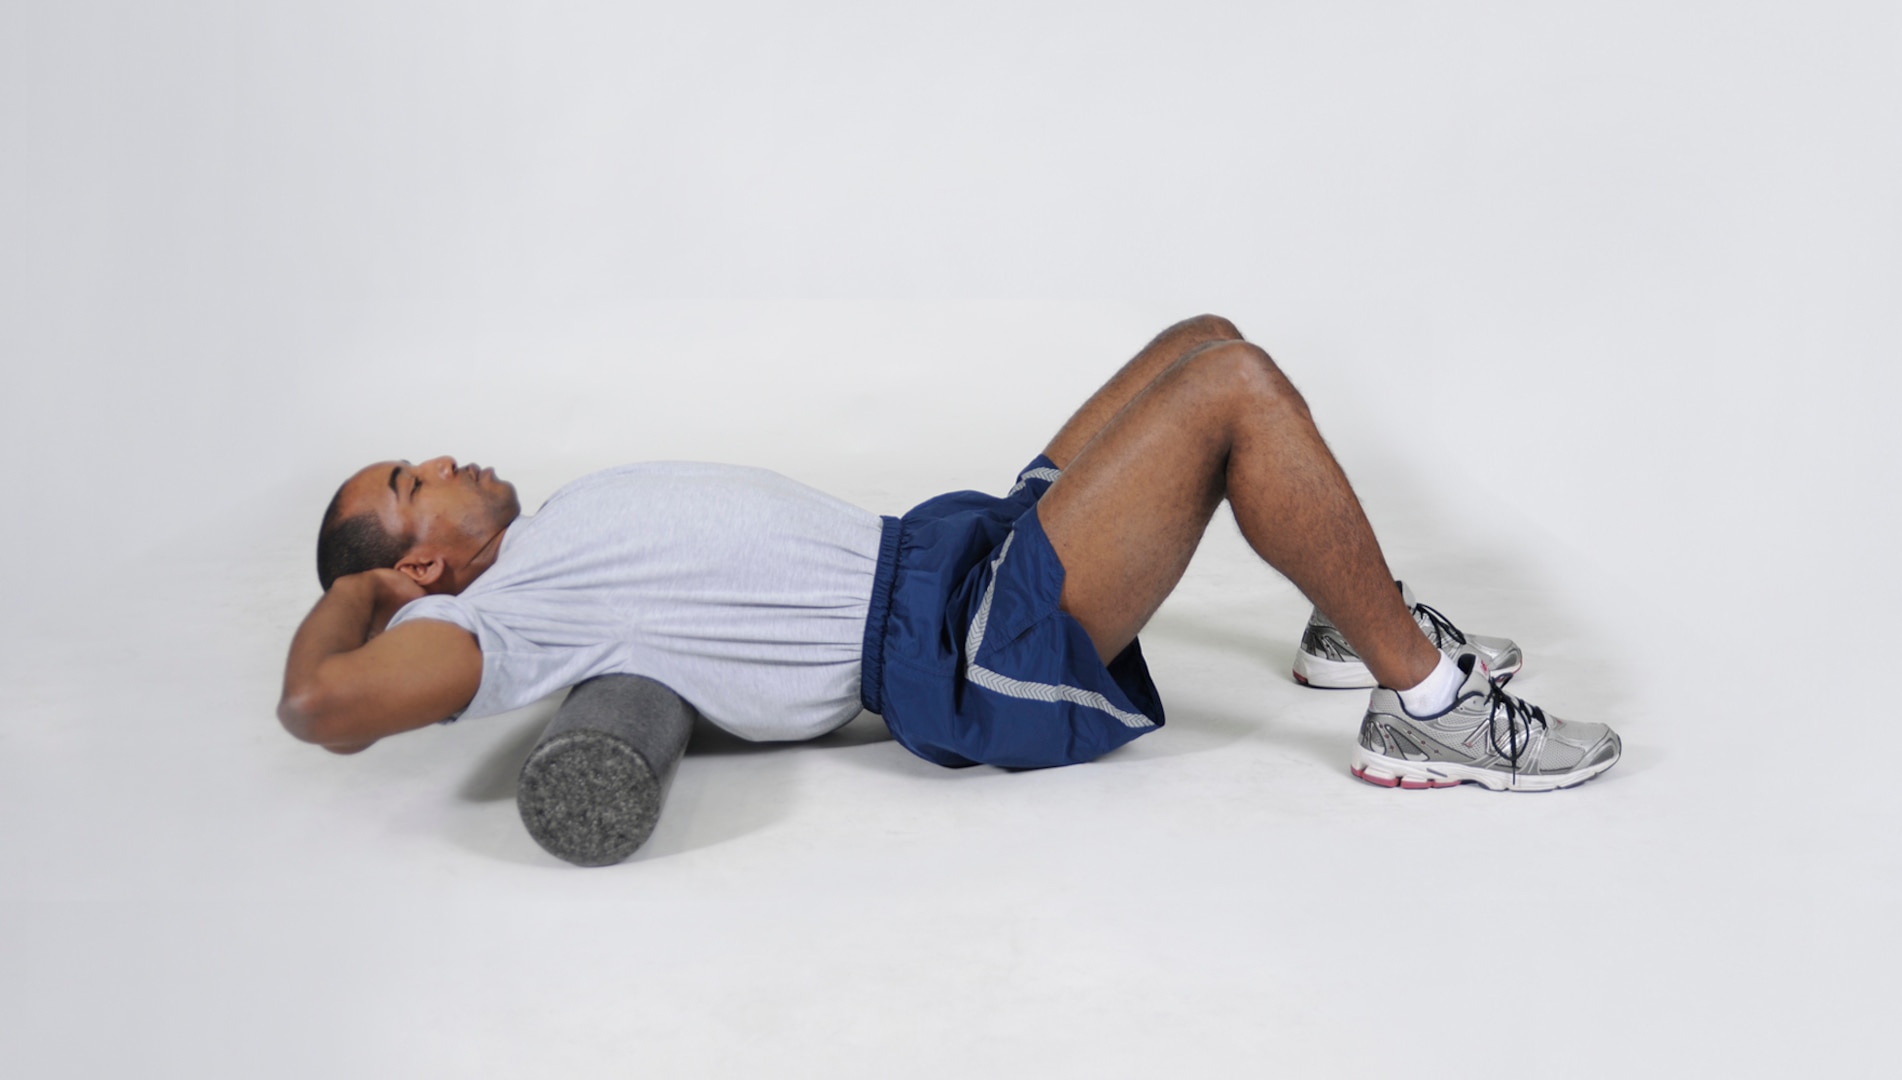 Thoracic Foam Roll
Lie face up with a foam roller under the upper back, at the top of the shoulder blades. Cross the arms over the chest or clasp behind the head with elbows back. The knees should be bent, with the feet flat on the floor. Raise the hips so they’re slightly elevated off the floor. Roll back and forth over the shoulder blades, middle back and upper back. 
